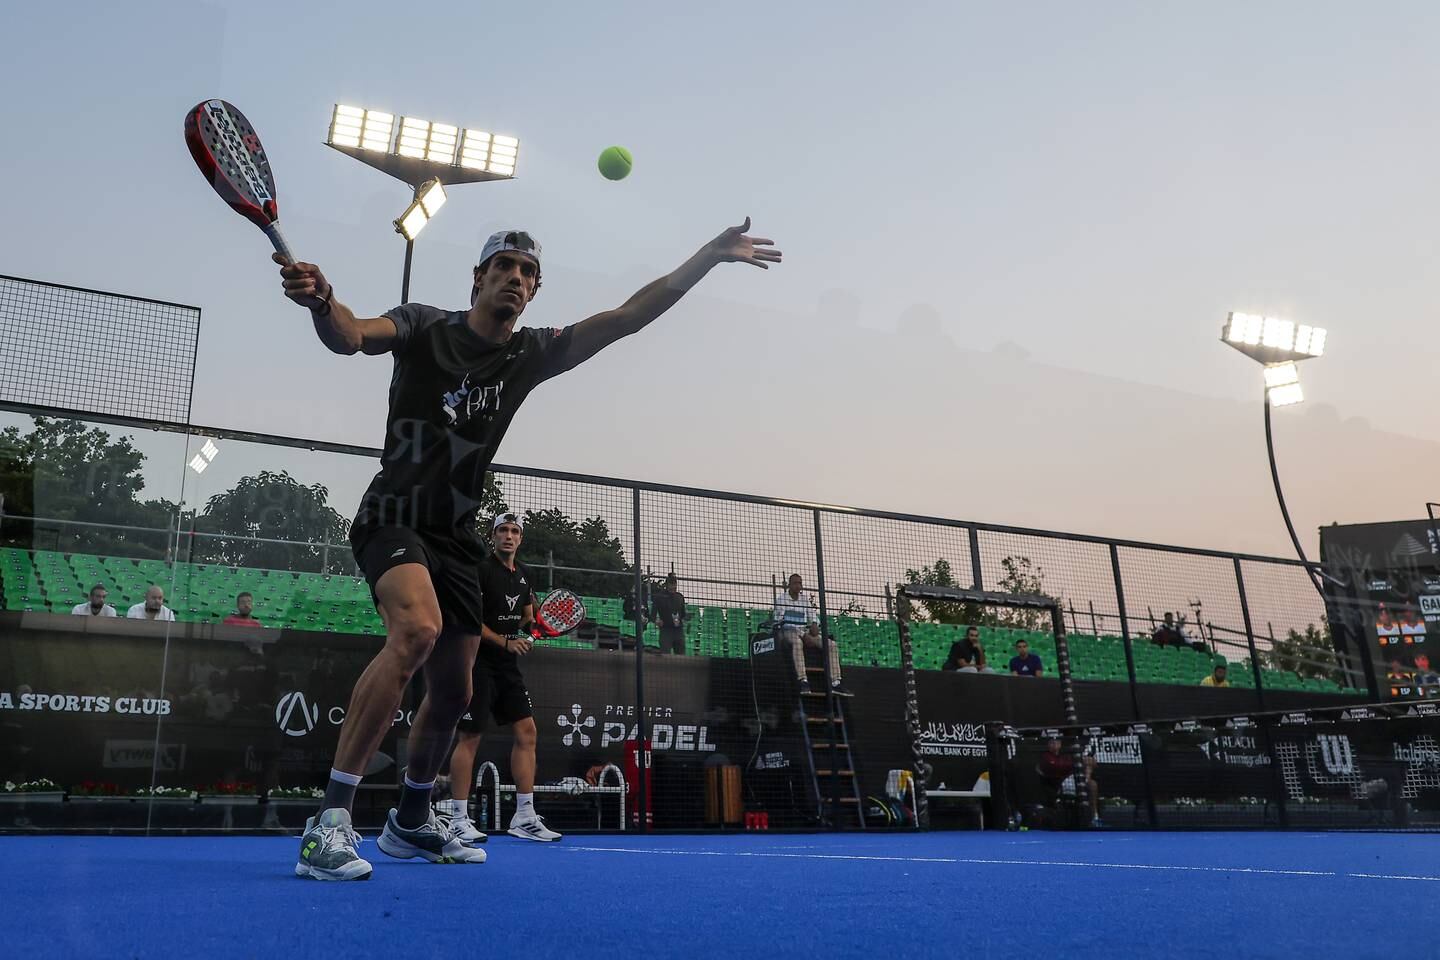 Alejandro Galan and Juan Lebron of Spain in action at the New Giza Premier Padel P1 tournament at New Giza Sports Club. Photo: Premier Padel